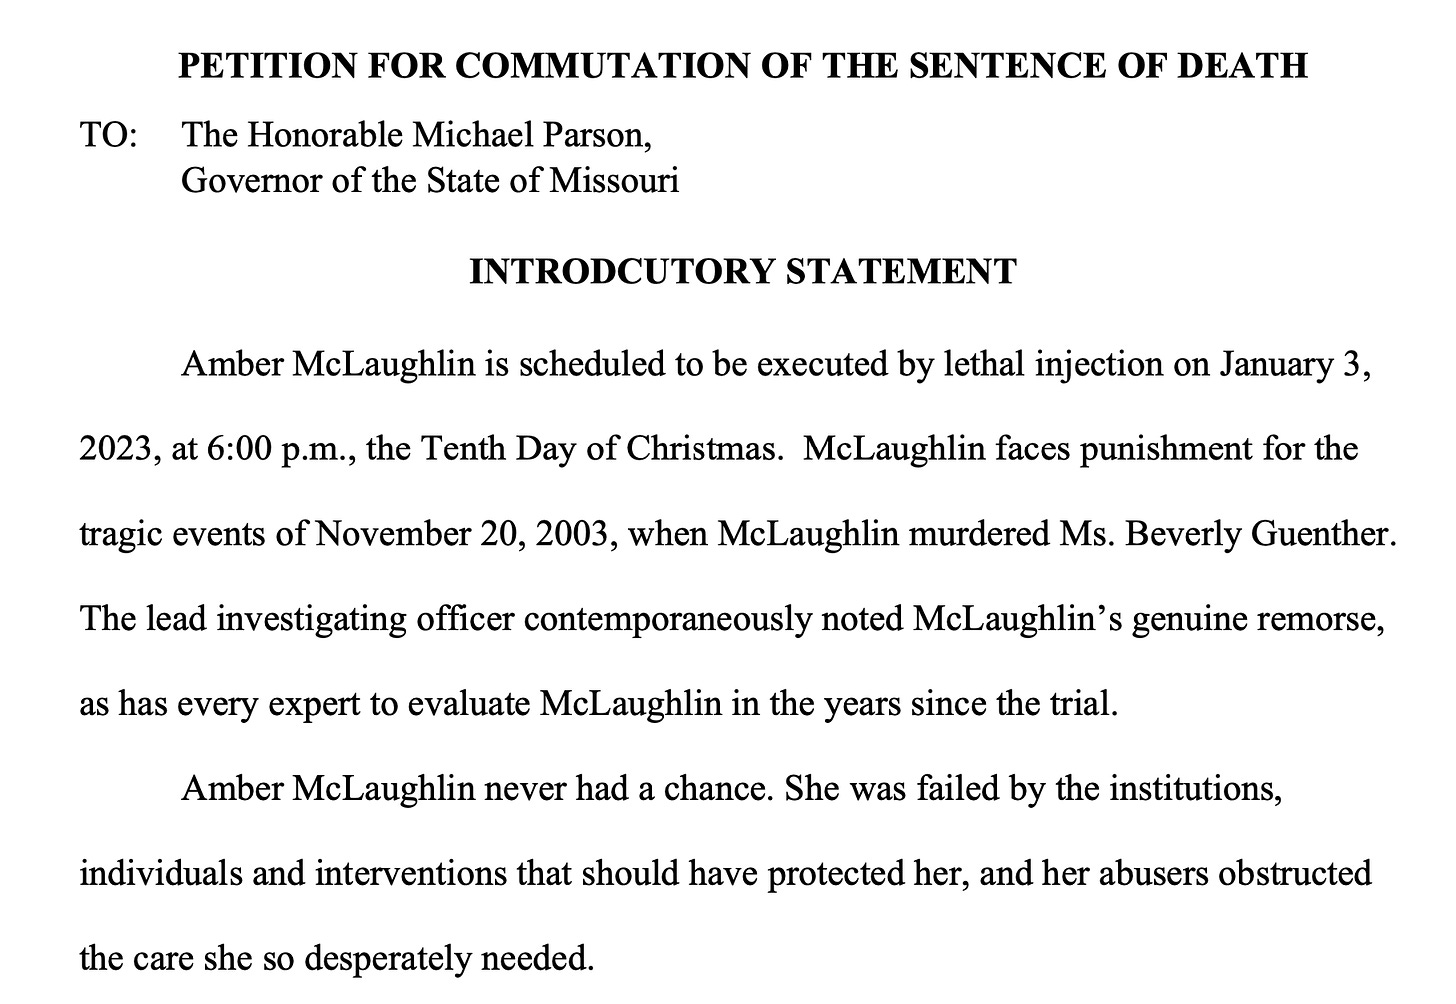 PETITION FOR COMMUTATION OF THE SENTENCE OF DEATH TO: The Honorable Michael Parson, Governor of the State of Missouri INTRODCUTORY STATEMENT Amber McLaughlin is scheduled to be executed by lethal injection on January 3, 2023, at 6:00 p.m., the Tenth Day of Christmas. McLaughlin faces punishment for the tragic events of November 20, 2003, when McLaughlin murdered Ms. Beverly Guenther. The lead investigating officer contemporaneously noted McLaughlin’s genuine remorse, as has every expert to evaluate McLaughlin in the years since the trial. Amber McLaughlin never had a chance. She was failed by the institutions, individuals and interventions that should have protected her, and her abusers obstructed the care she so desperately needed.